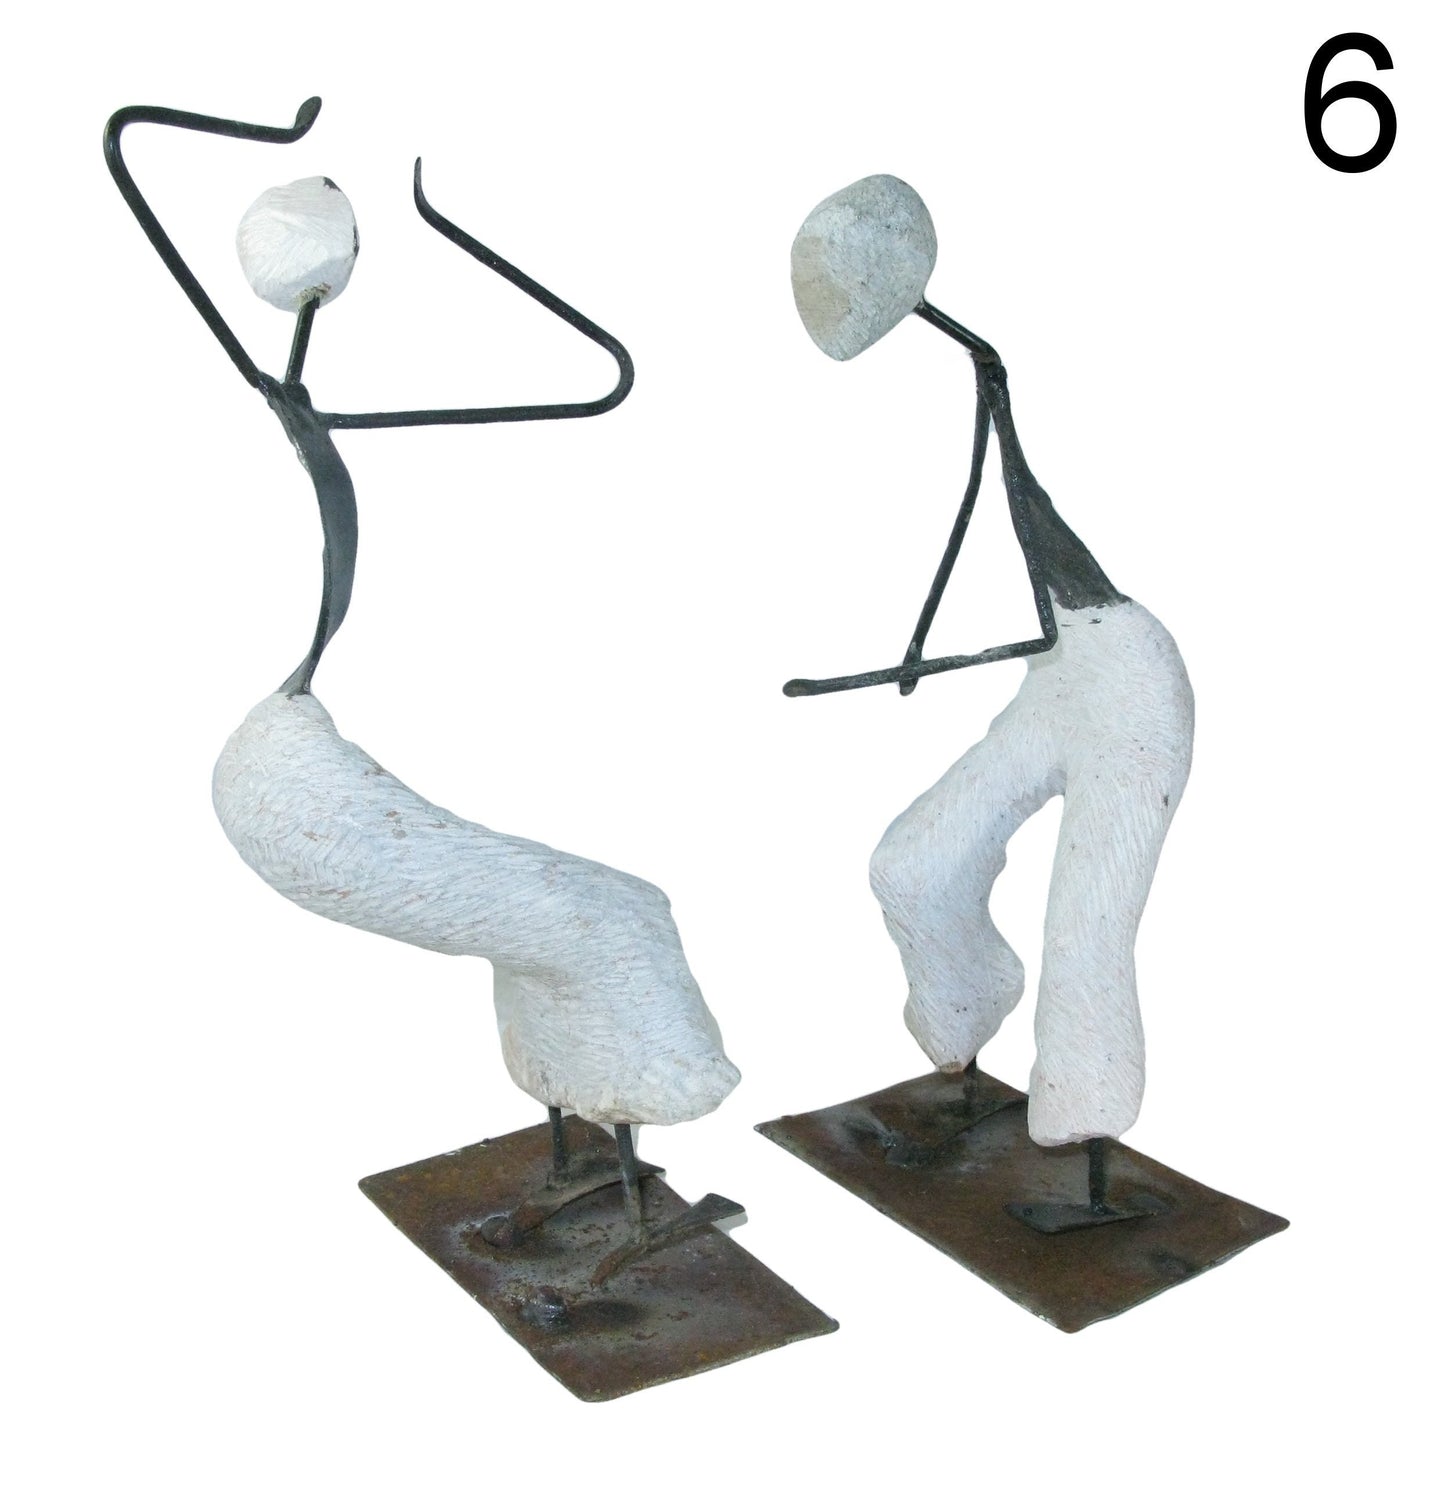 African Dancers Stone & Metal Sculptures from Zimbabwe 24m Tall Pair with Storycard Choose Your Unique Pair